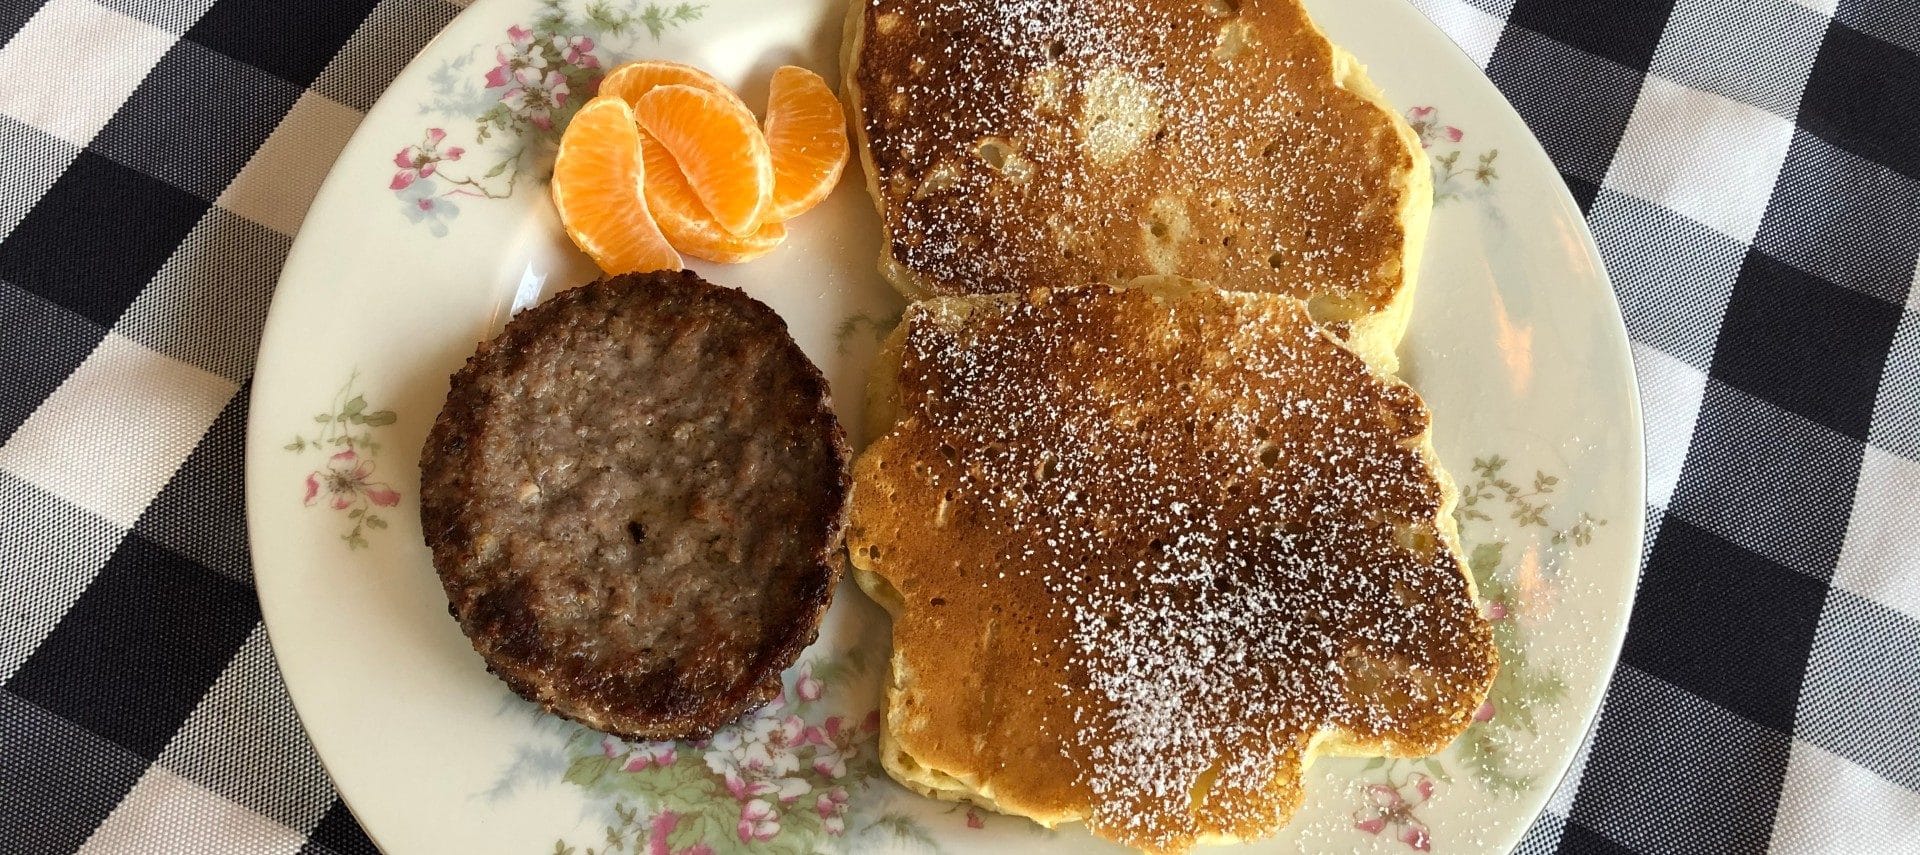 Two apple pancakes sprinkled with powedered sugar, a sausage patty, and some orange sections on a plate.